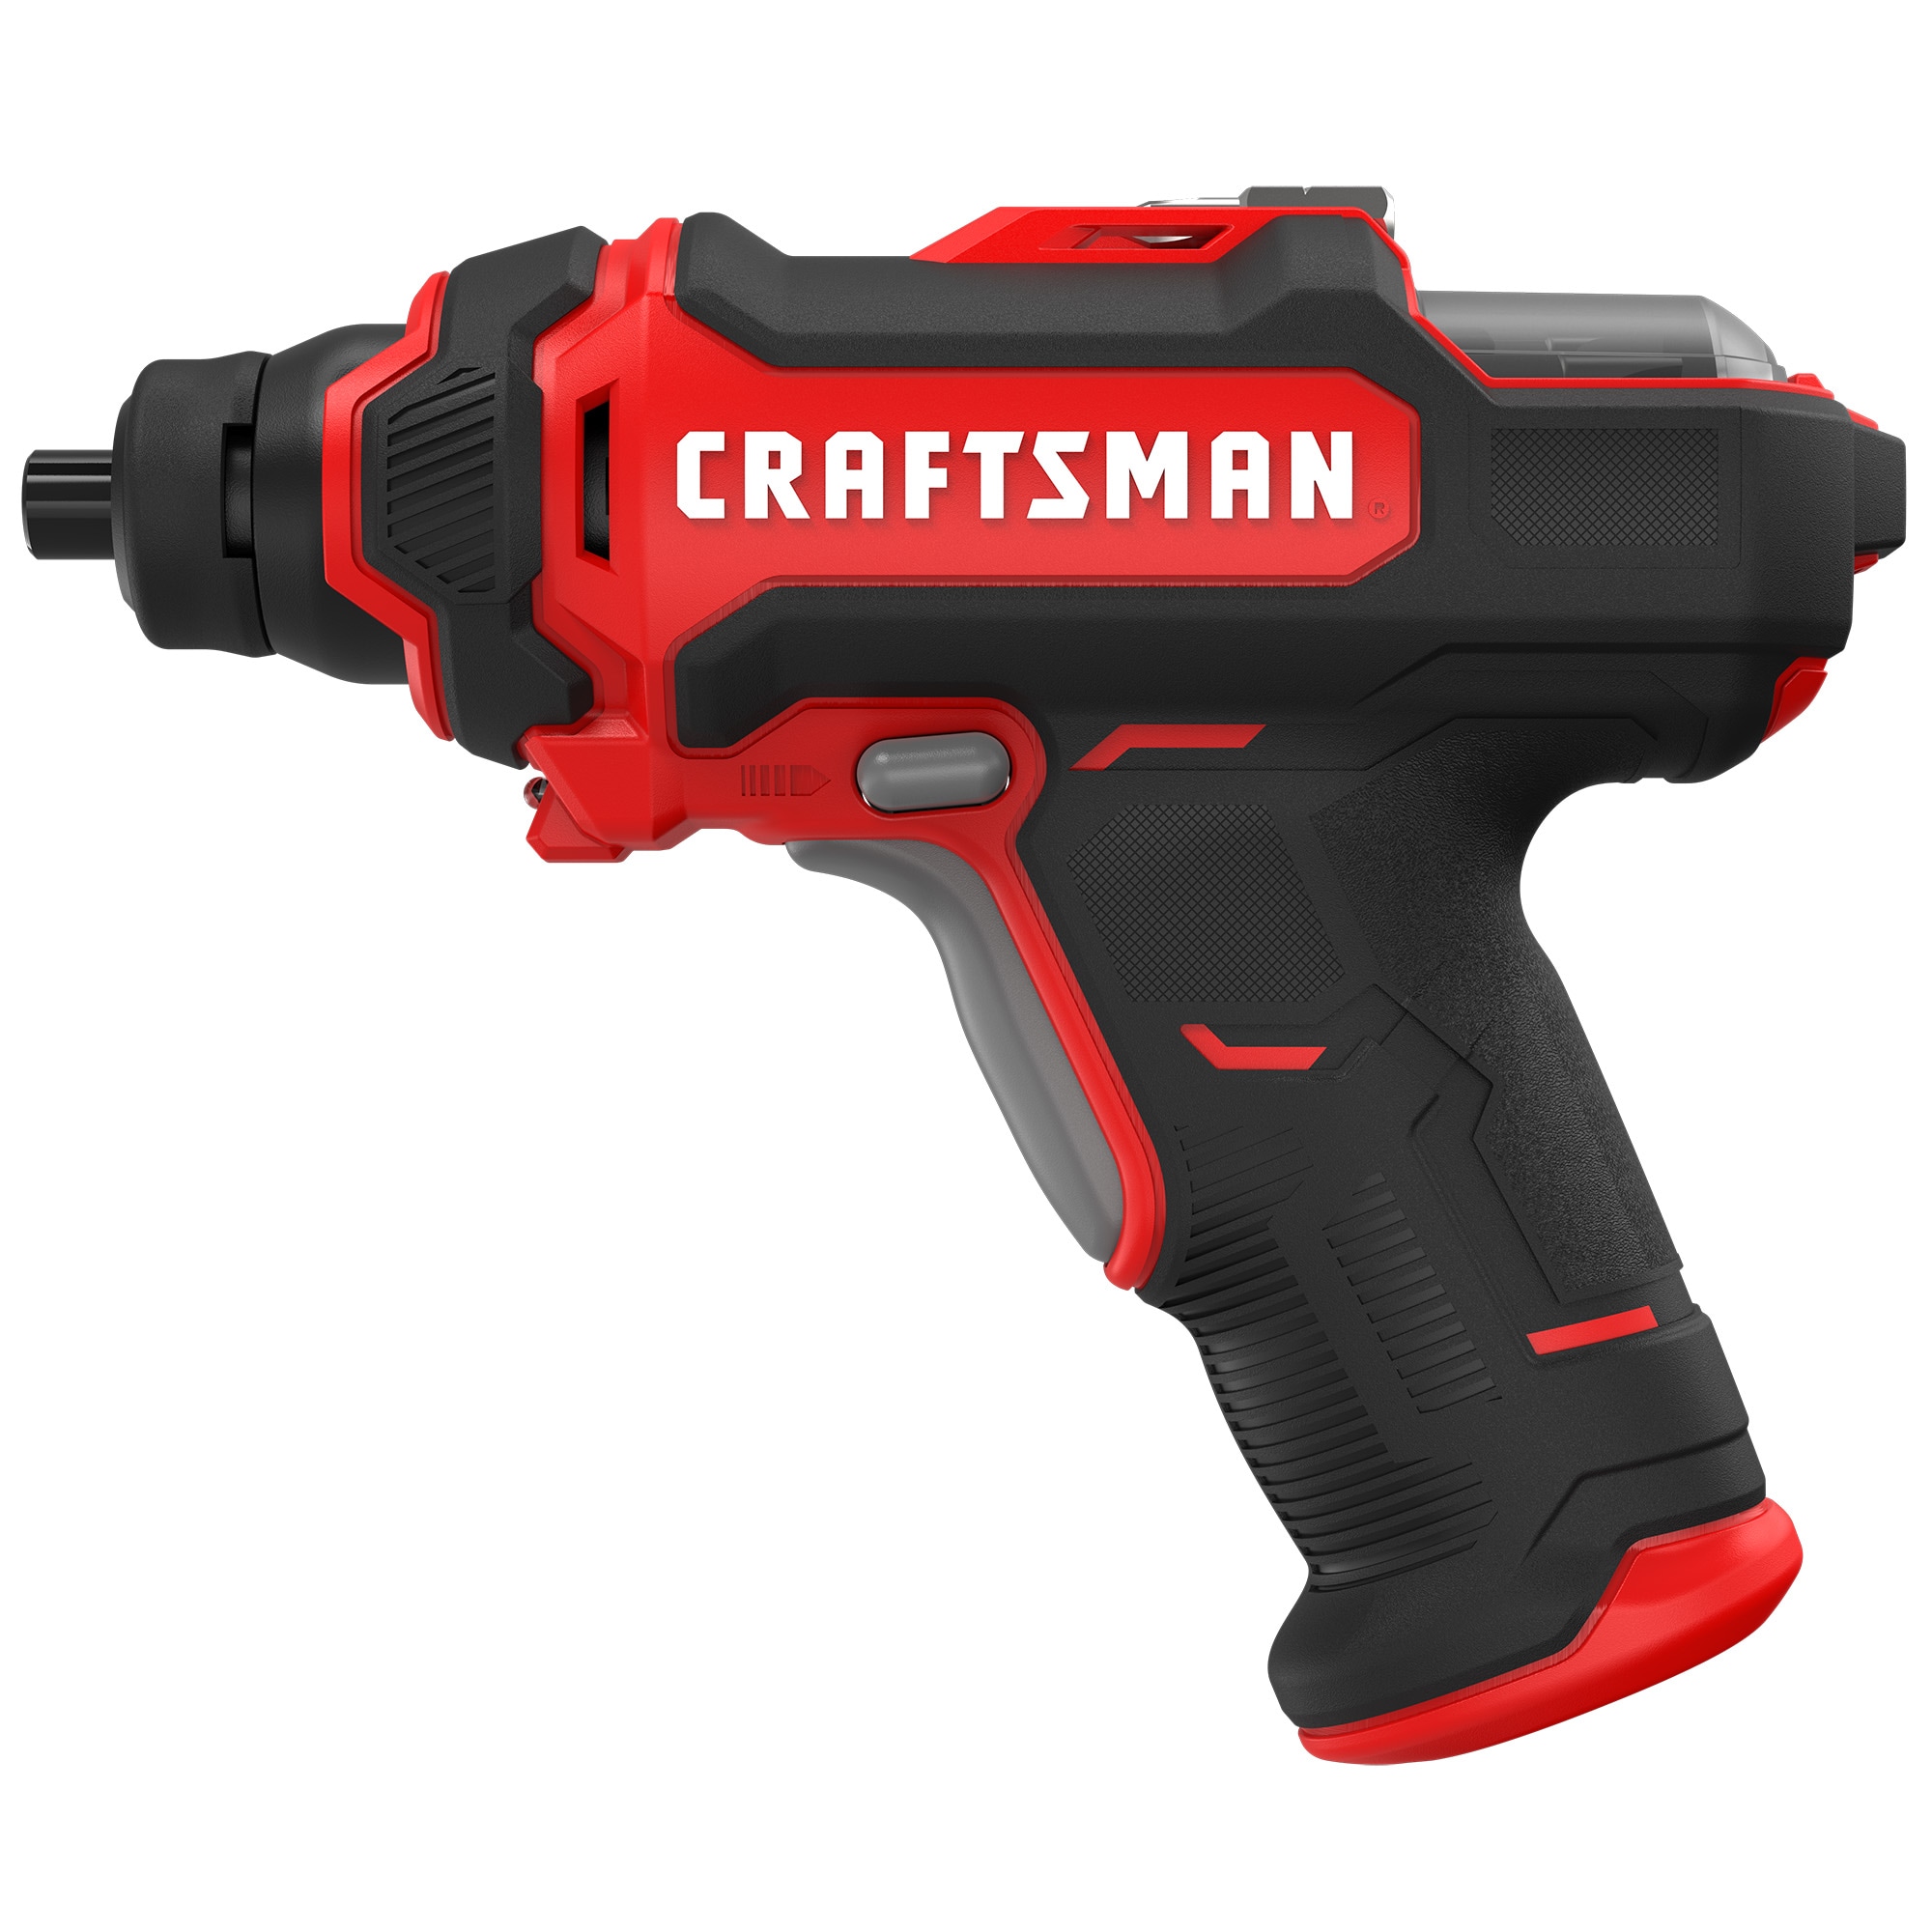 CRAFTSMAN 4-volt 1/4-in Cordless Screwdriver (1-Battery Included